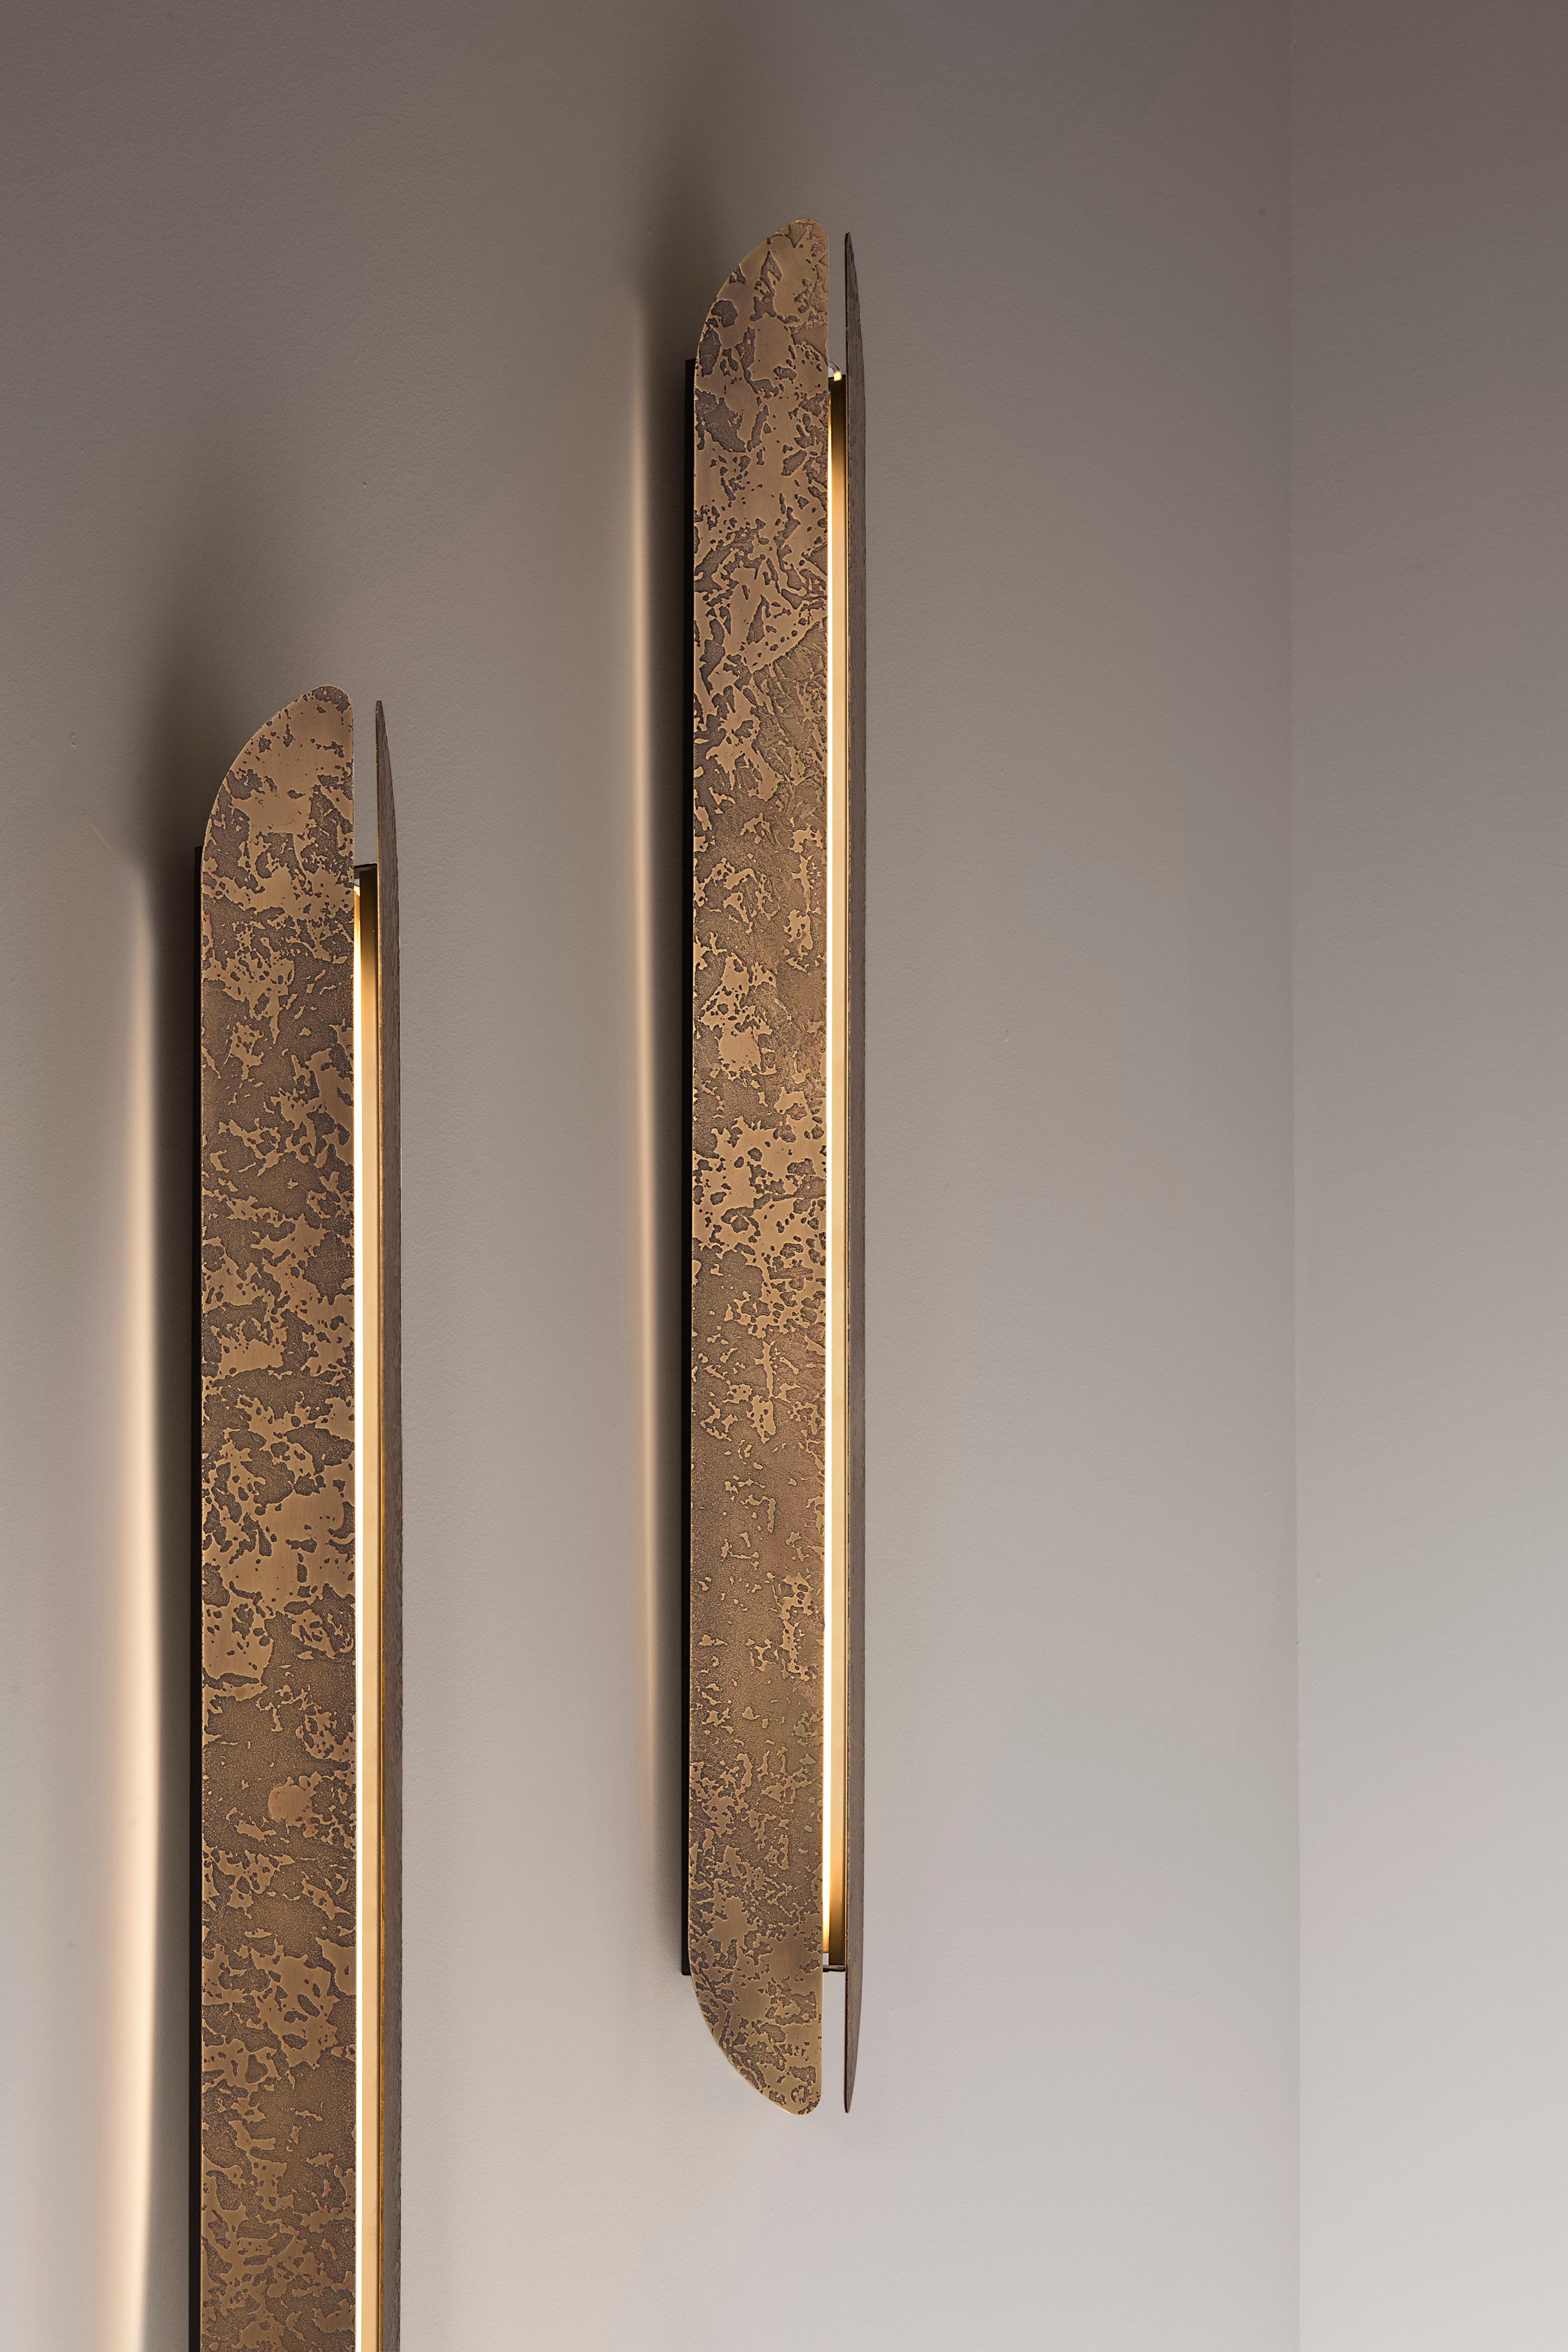 Modern DeCastelli Aare Wall Sconce in Brass by Alexander Purcell Rodrigues For Sale